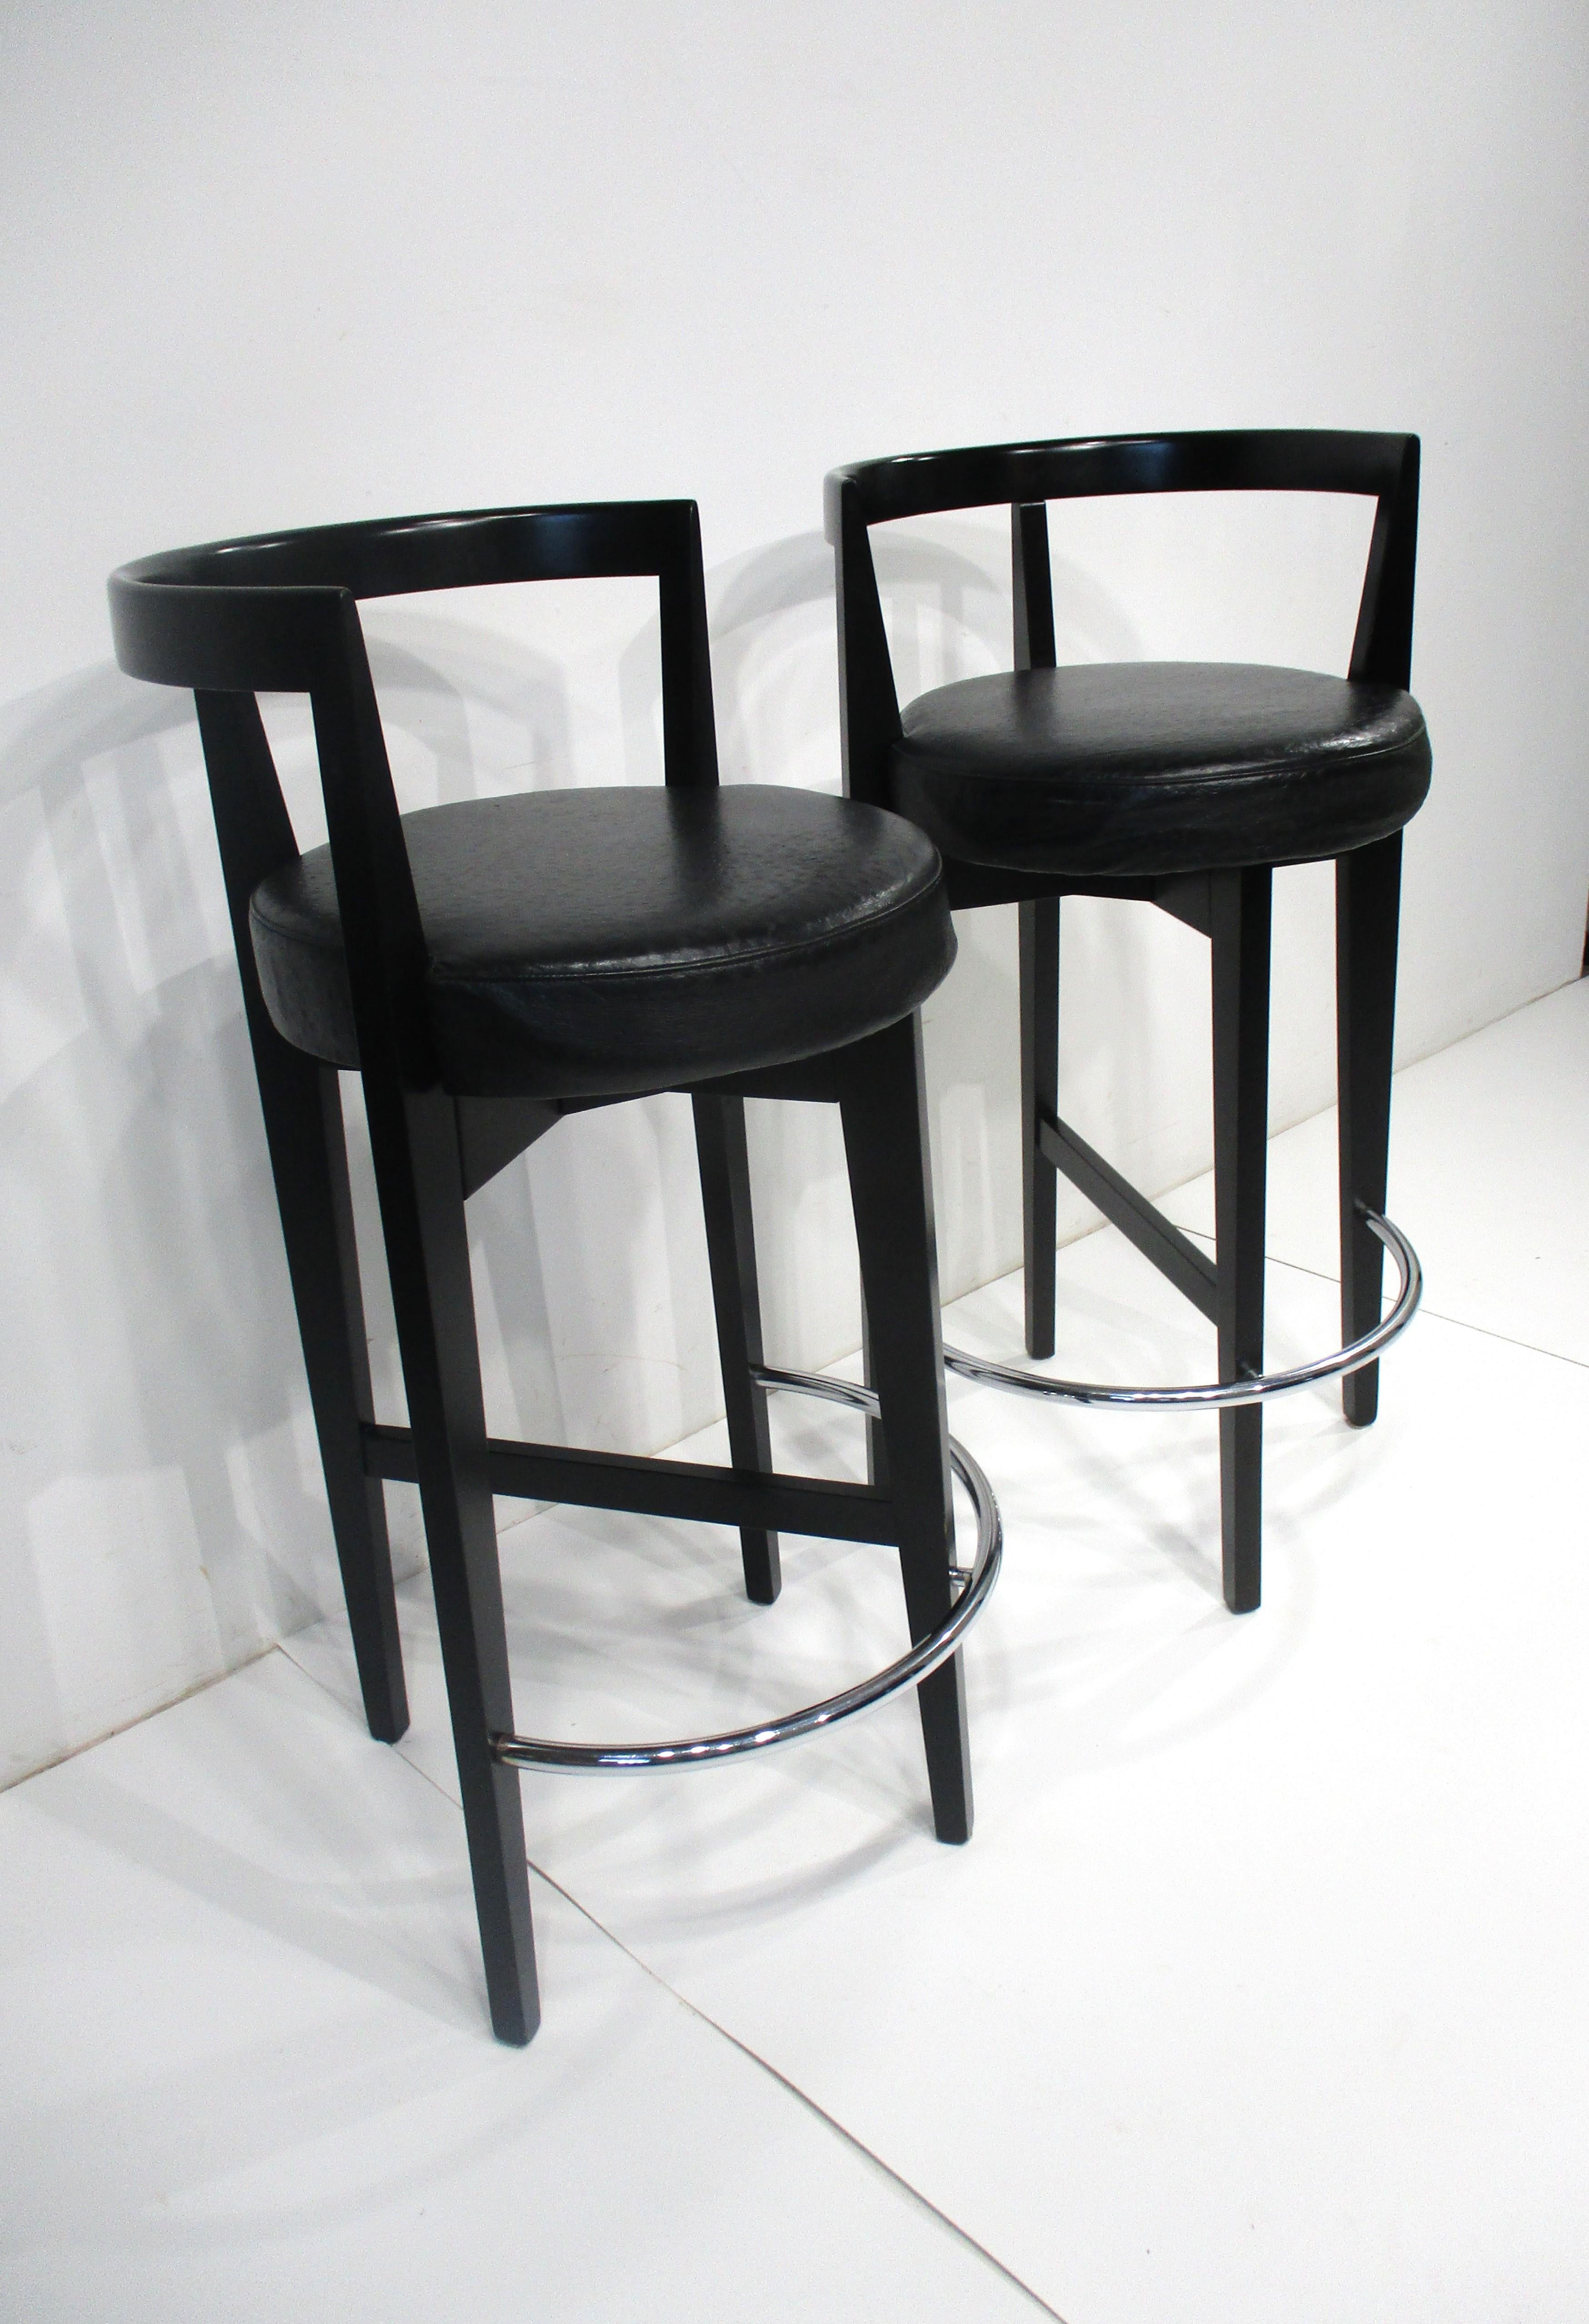 A pair of black wood framed bar / counter stools with ostrich styled leather seats . The rounded backs are great for long periods of comfortable sitting with the legs tapering down to half ring chrome foot rests . Made in Italy in the manner of the